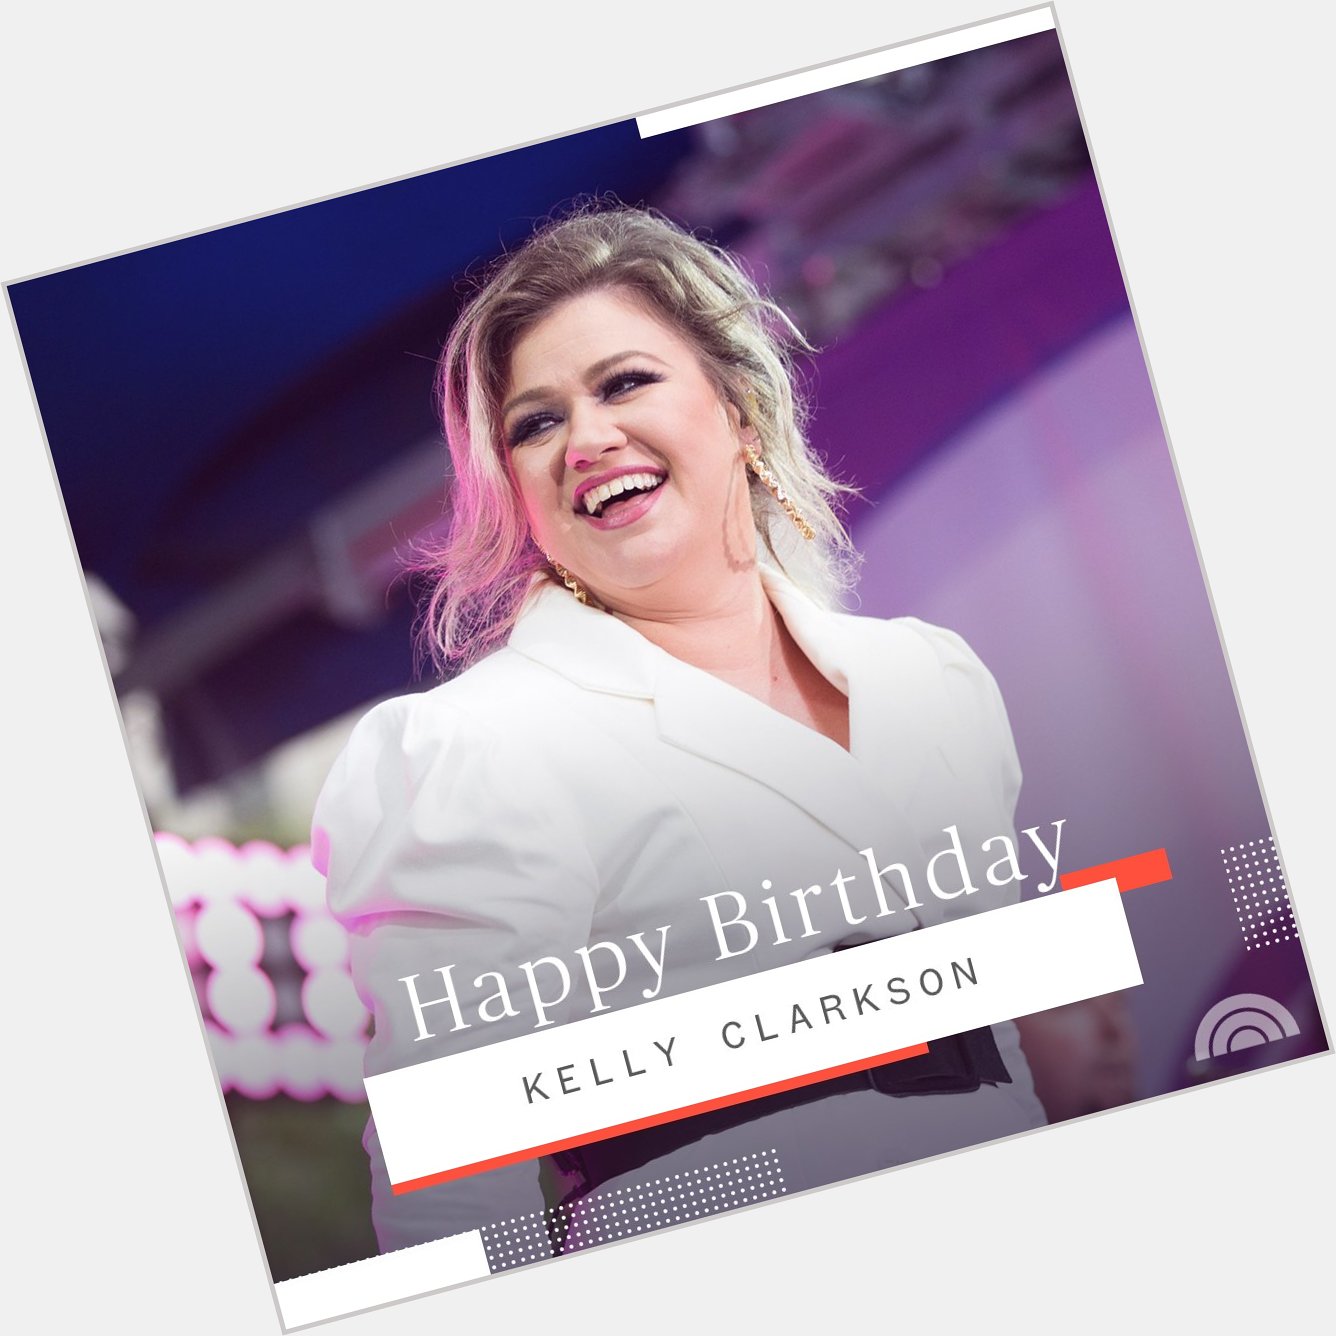 Happy birthday to our friend Kelly Clarkson! 